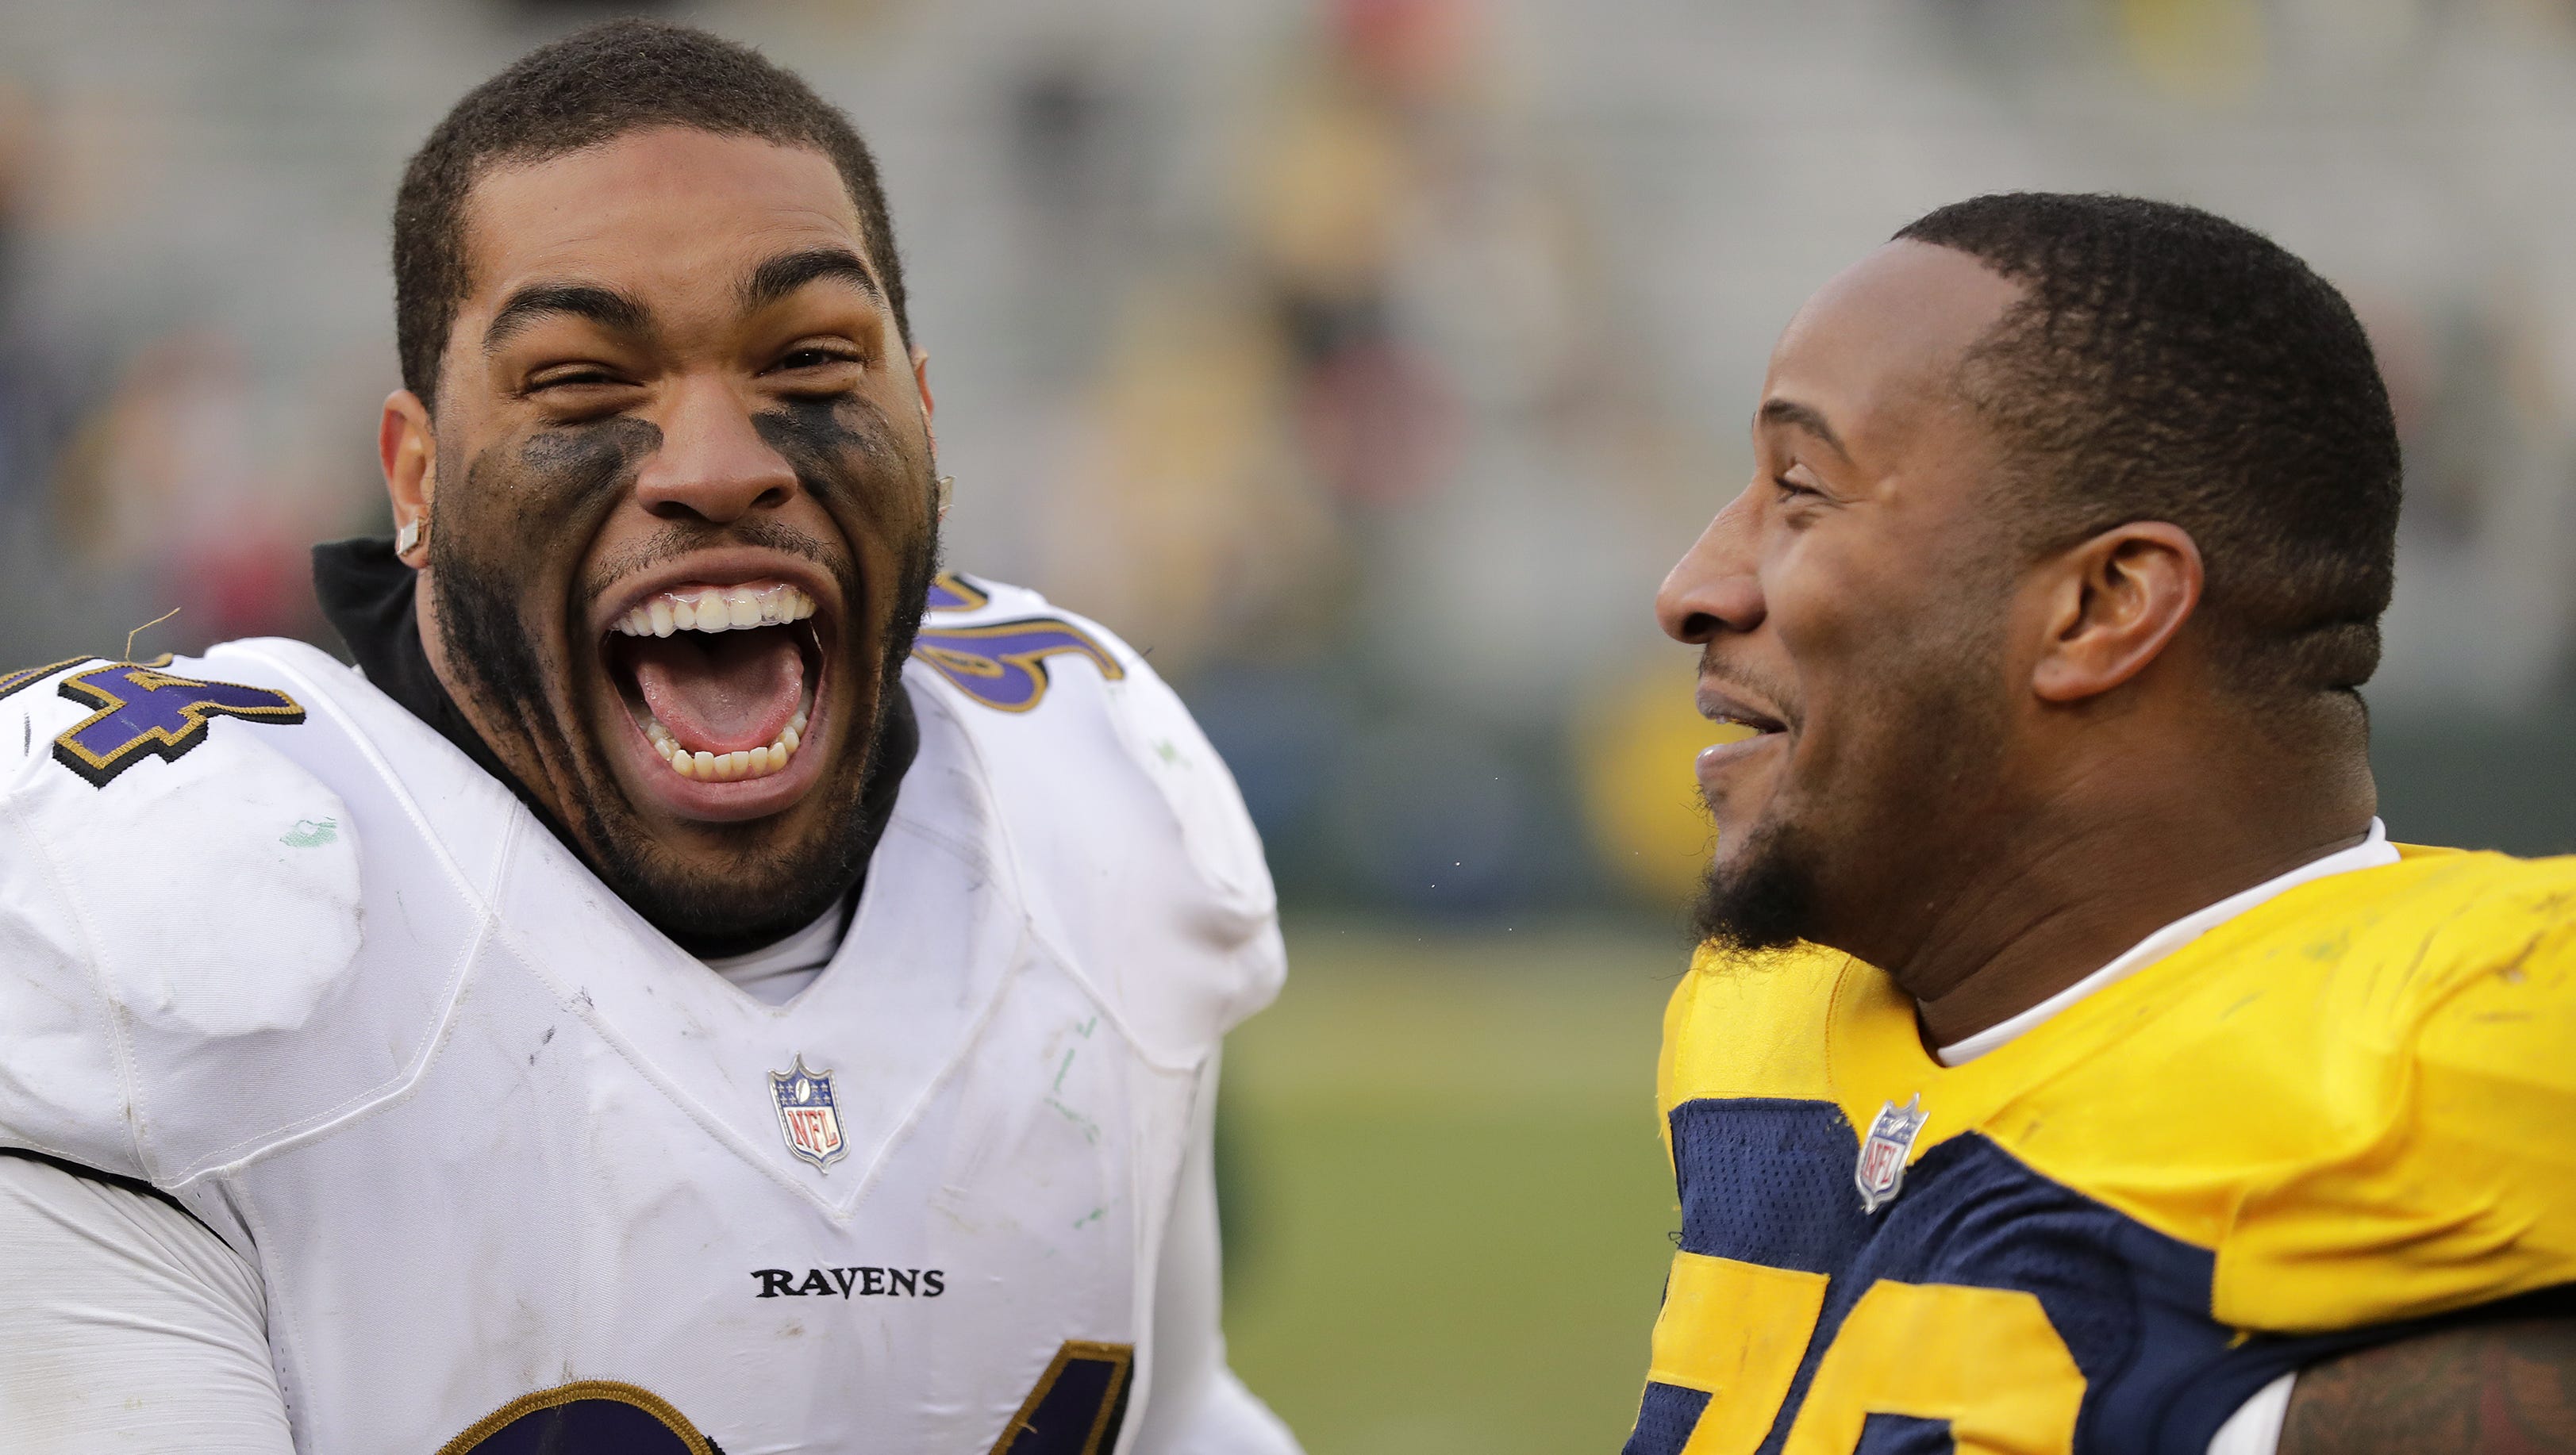 Baltimore Ravens defensive end Carl Davis (94) and Green Bay Packers defensive end Mike Daniels (76) laugh together after their game on Nov. 19, 2017, at Lambeau Field.